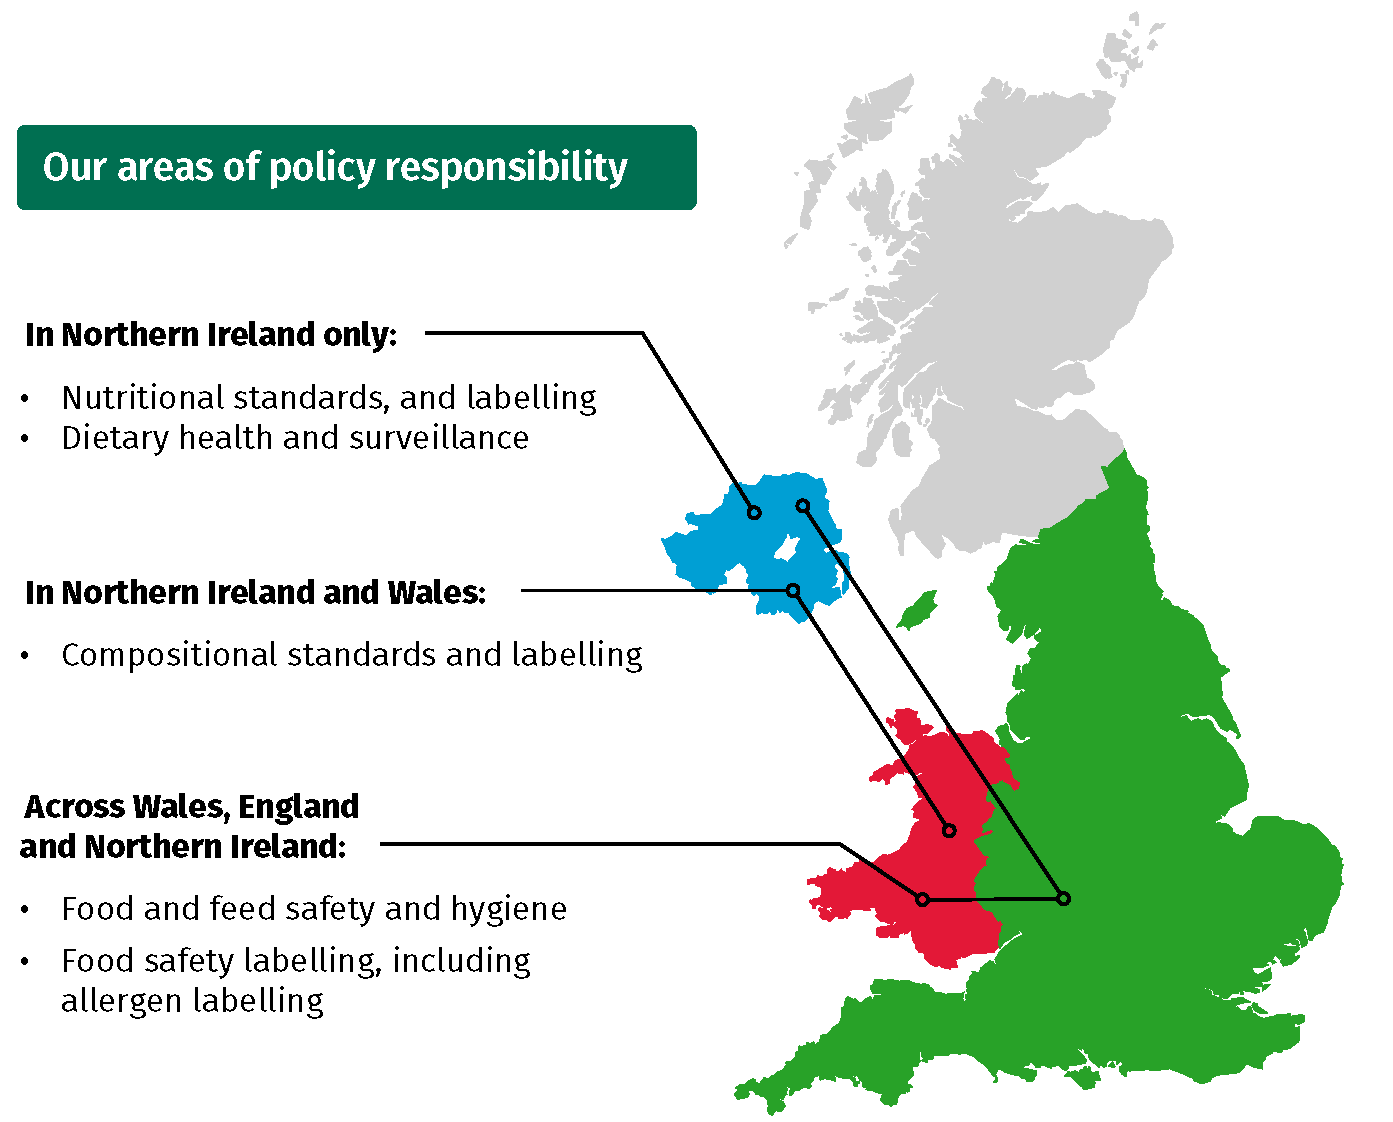 A map of United Kingdom with the 4 nations in different colours.  Our areas of policy responsibility  In Northern Ireland only: - nutritional standards, and labelling - dietary health and surveillance  In Northern Ireland and Wales: - compositional standards and labelling   Across England, Northern Ireland, and Wales: - food and feed safety and hygiene - food safety labelling, including allergen labelling